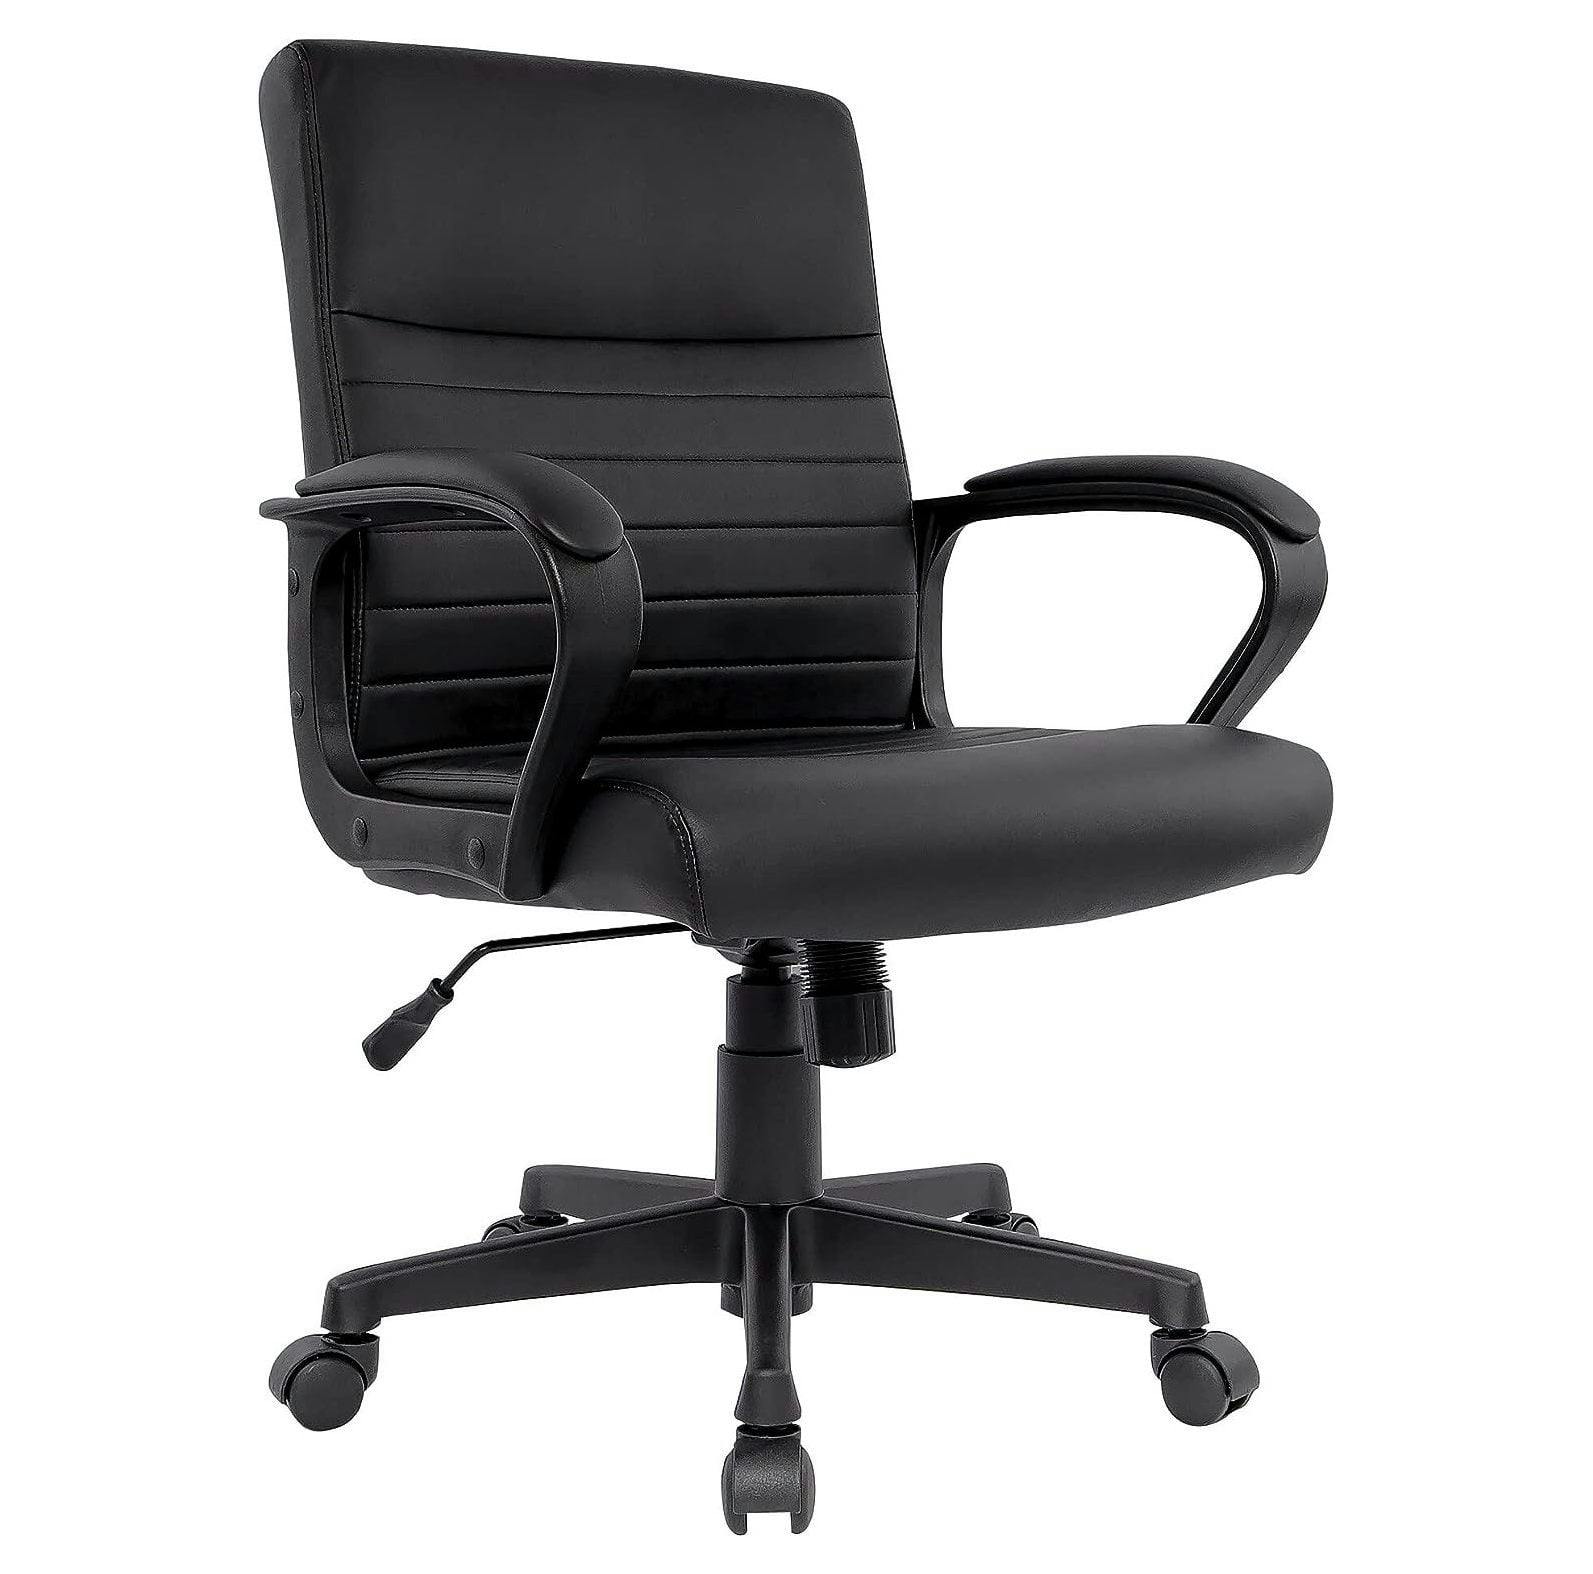 Tervina Executive Black Luxura Faux Leather Swivel Chair